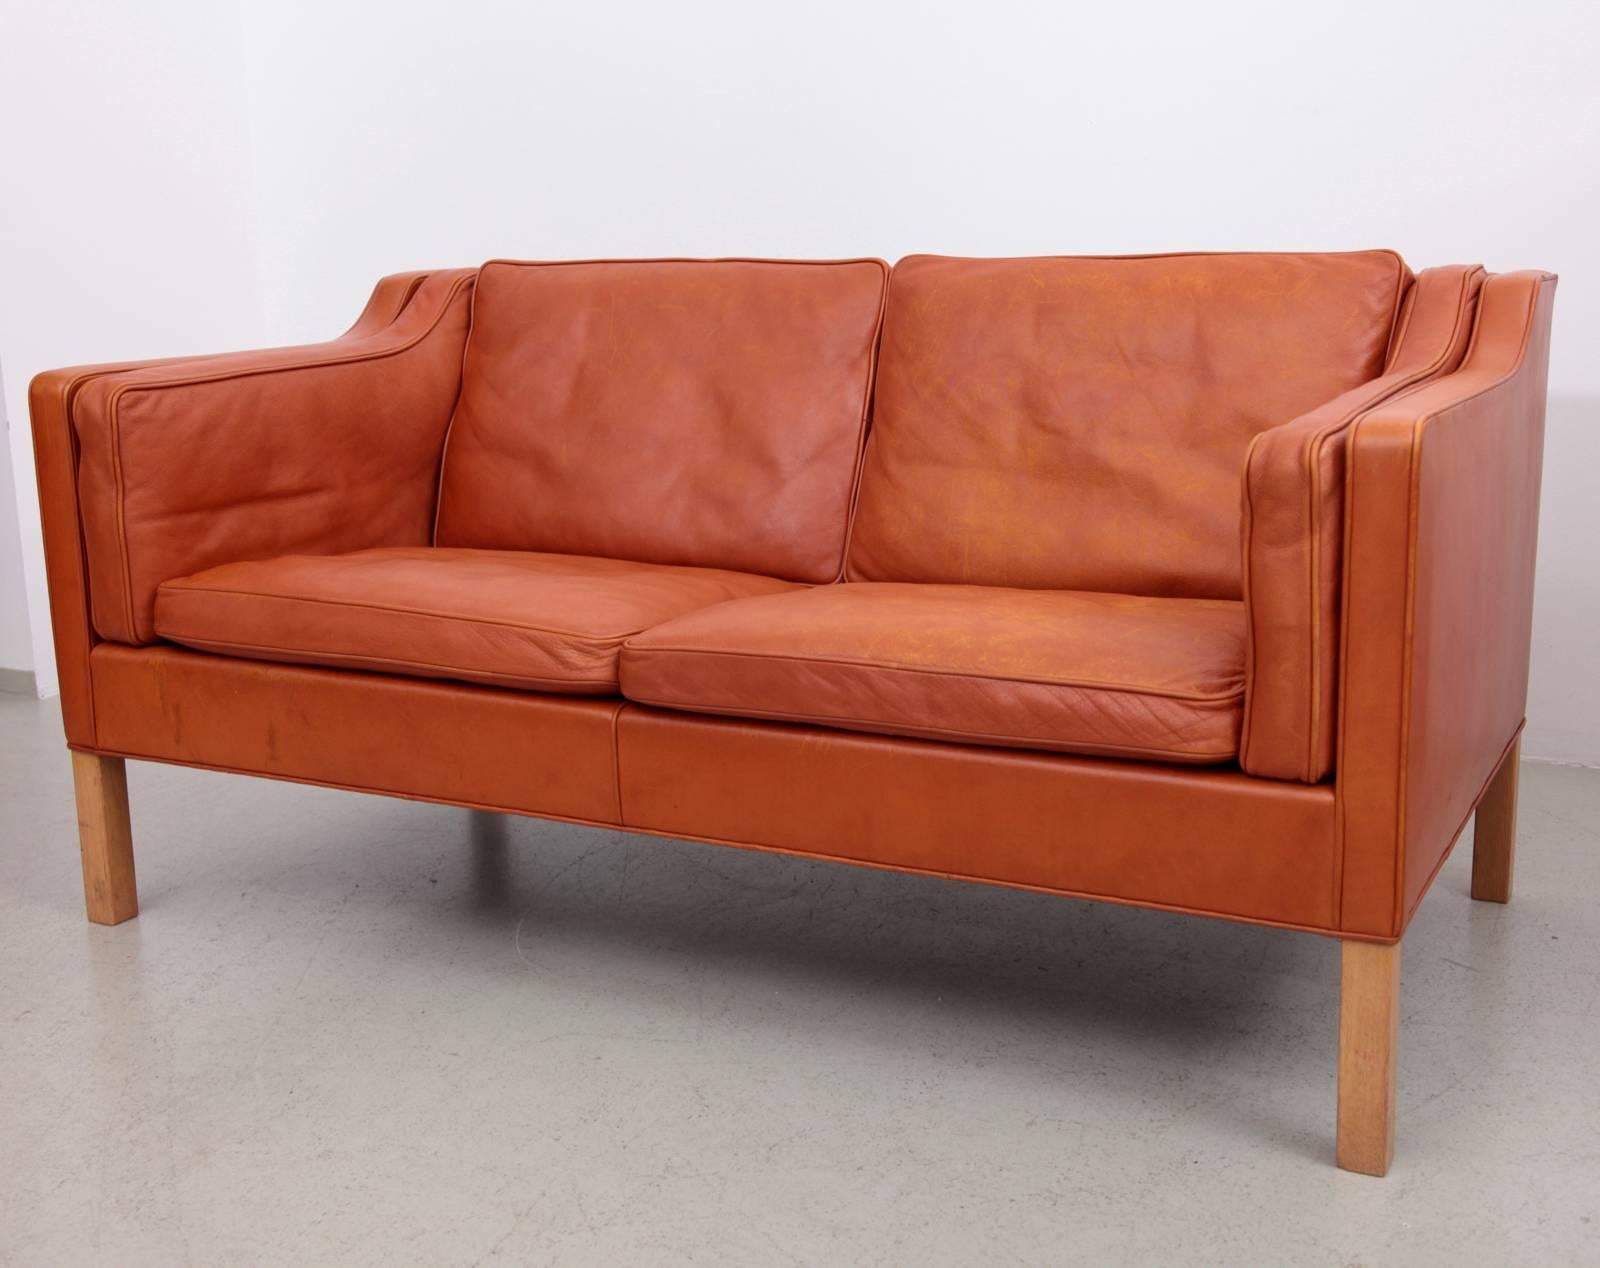 Fantastic early example of the Classic two-seat sofa designed by Børge Mogensen for Fredericia, Denmark, model 2213. This example in wonderful and super rare thick cognac leather with perfect vintage patina.